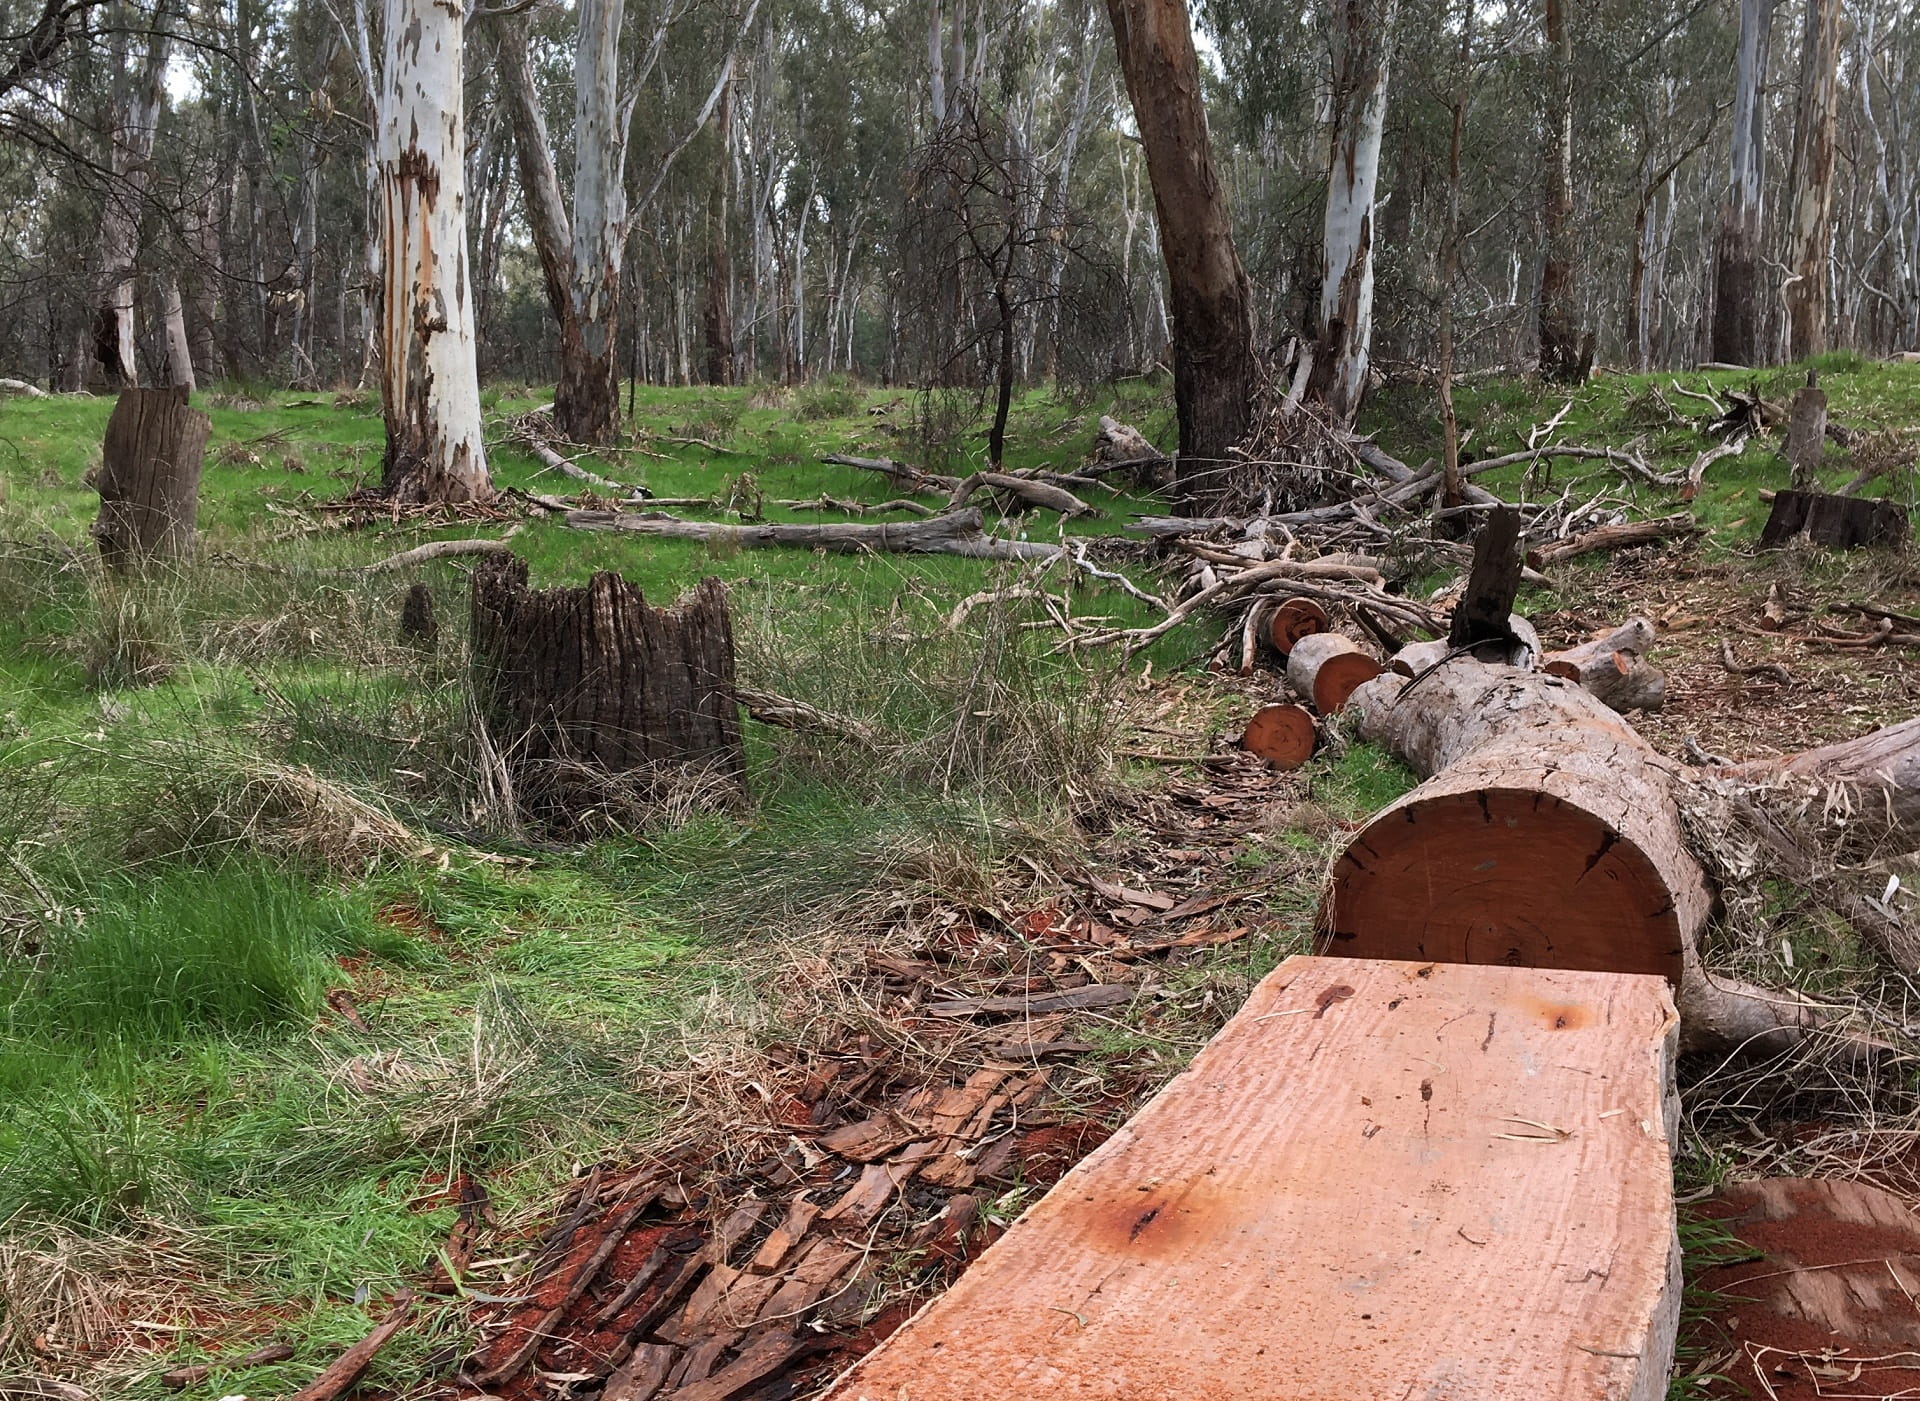 After filling their trailers or utes, thieves often discard illegally cut timber on the forest floor. This example is also from Lower Goulburn National Park